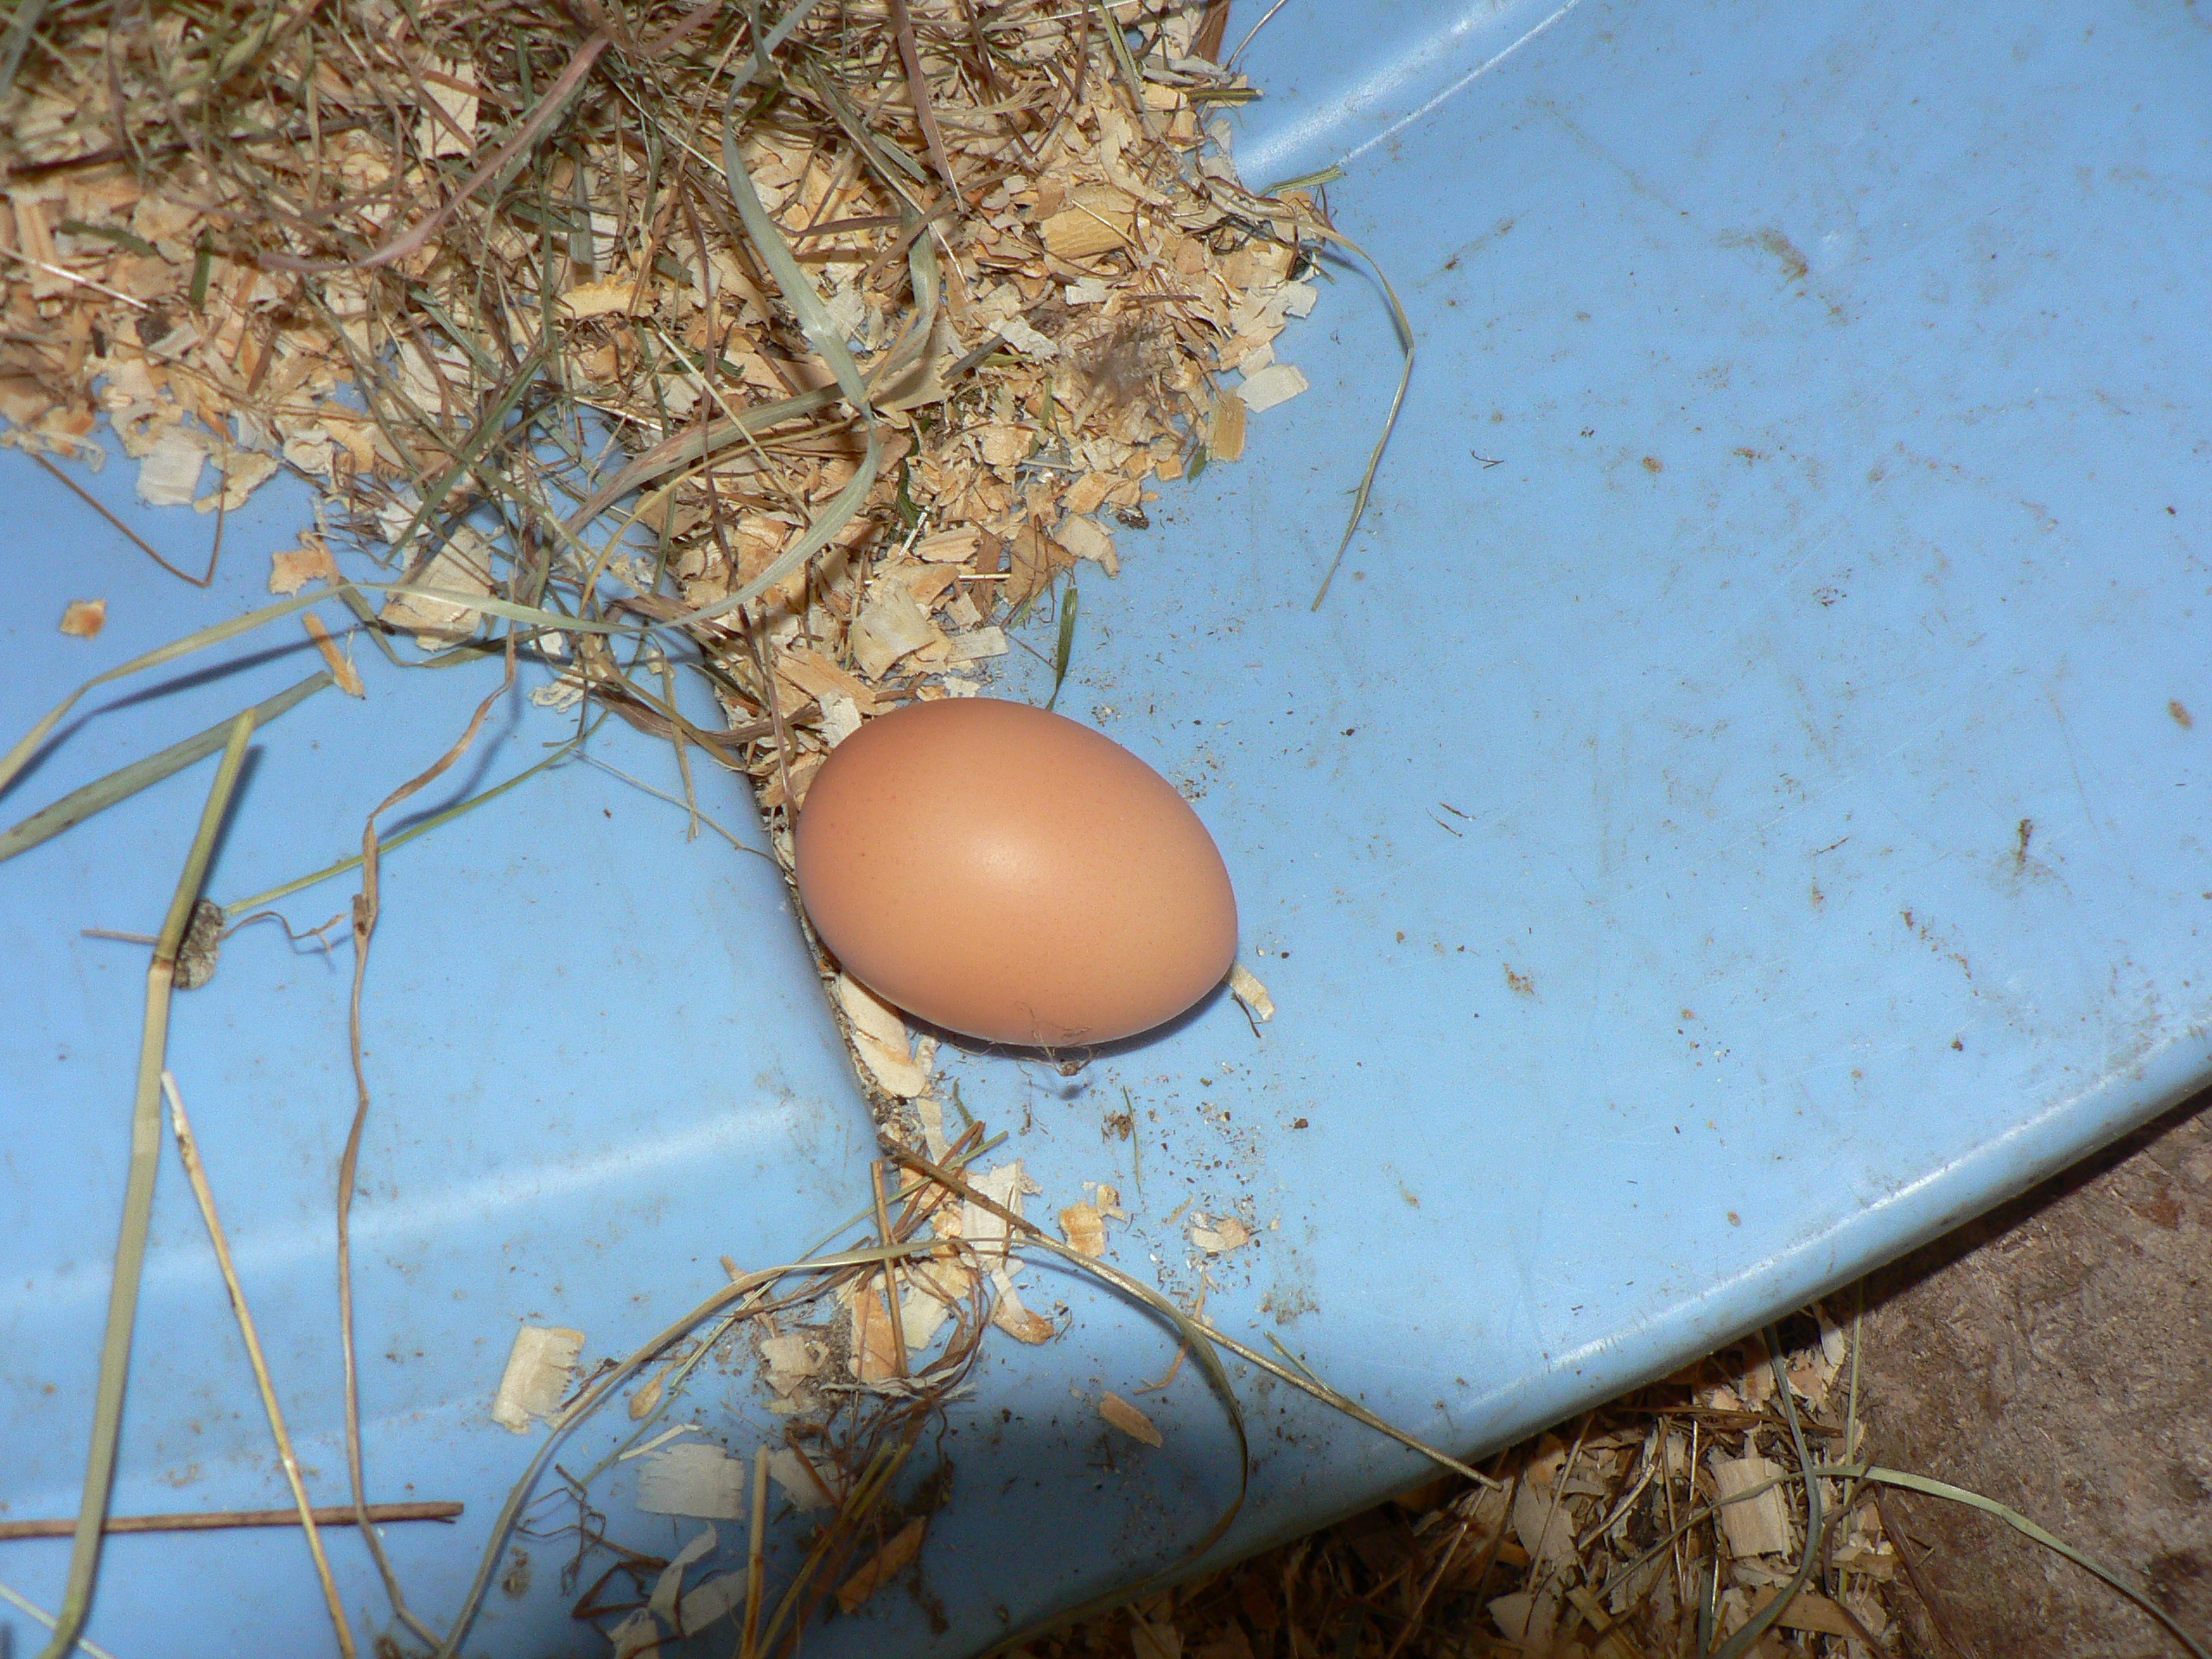 her egg she laid early this afternoon